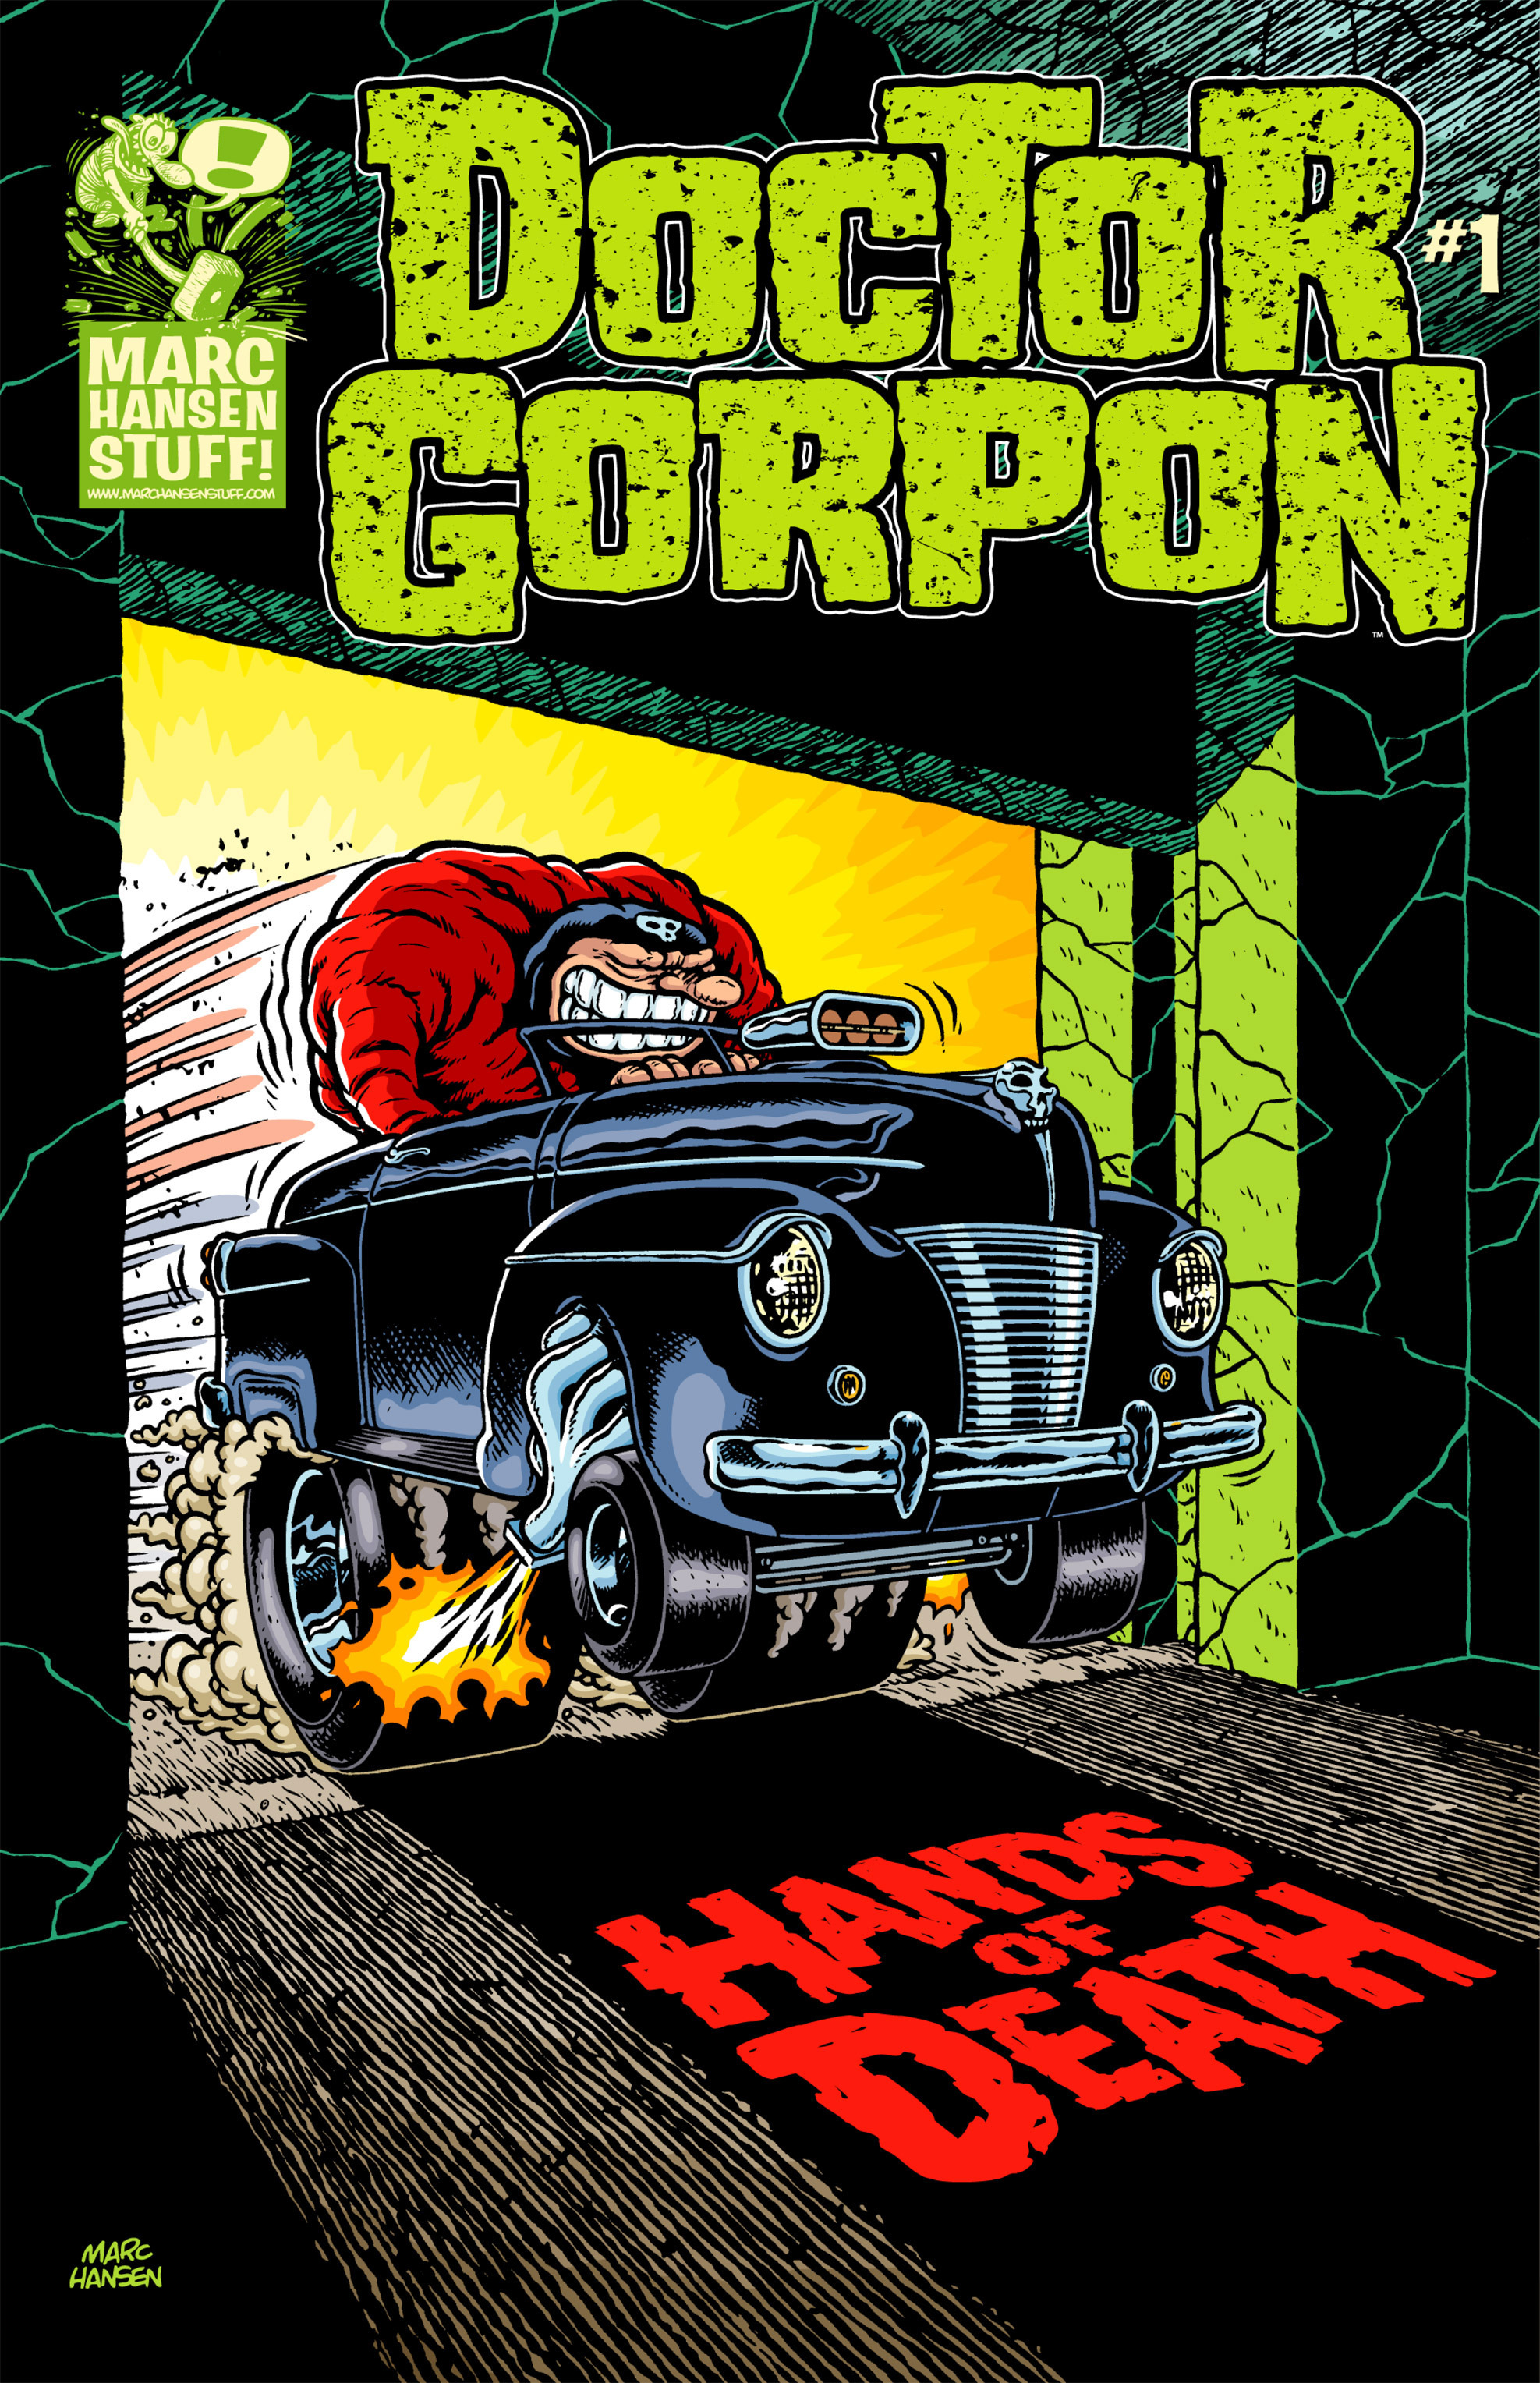 Read online Doctor Gorpon comic -  Issue #1 - 1